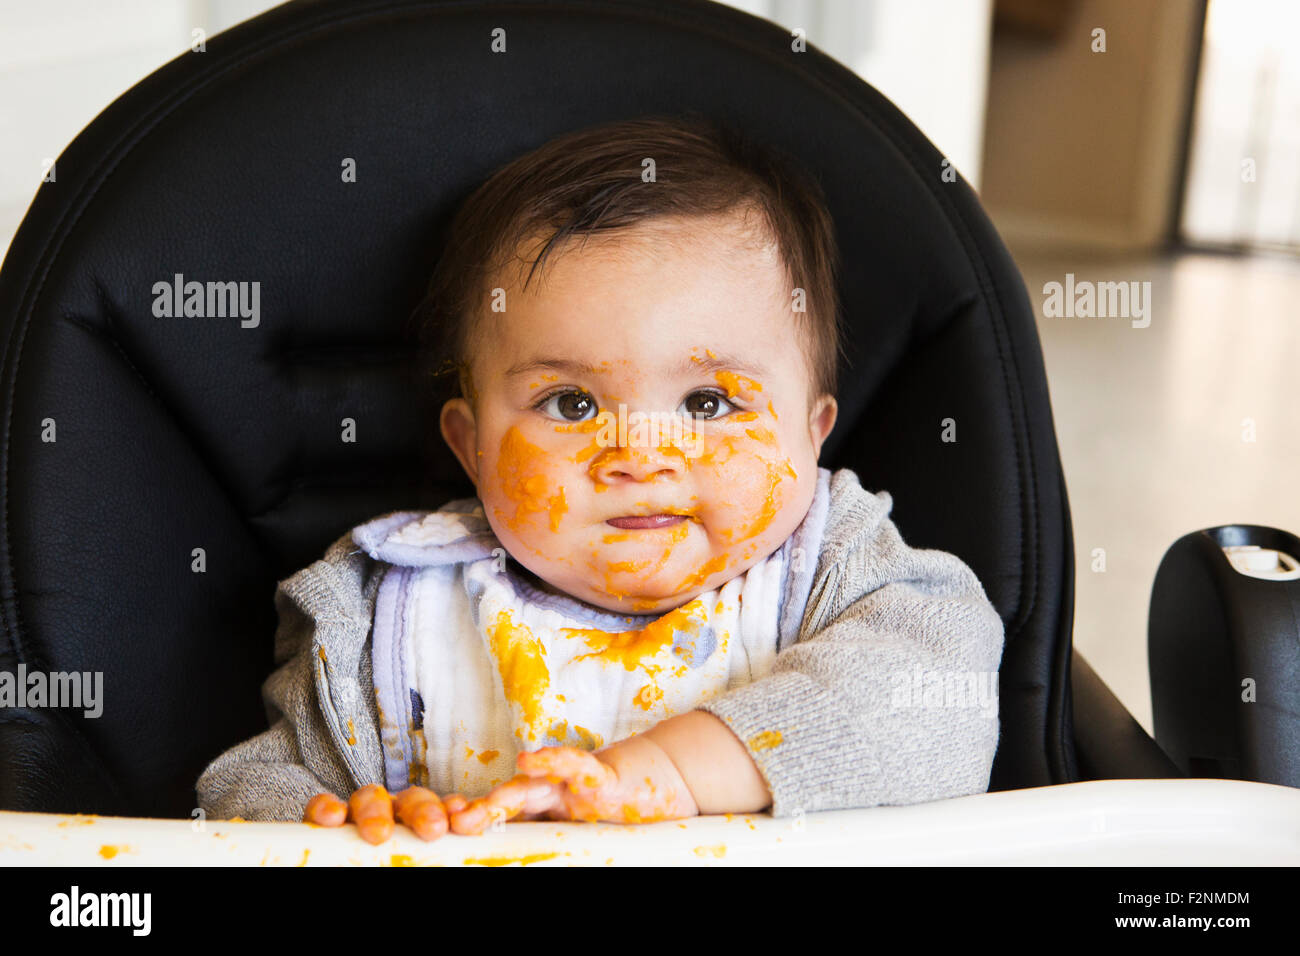 Messy Mixed race baby eating food in high chair Stock Photo